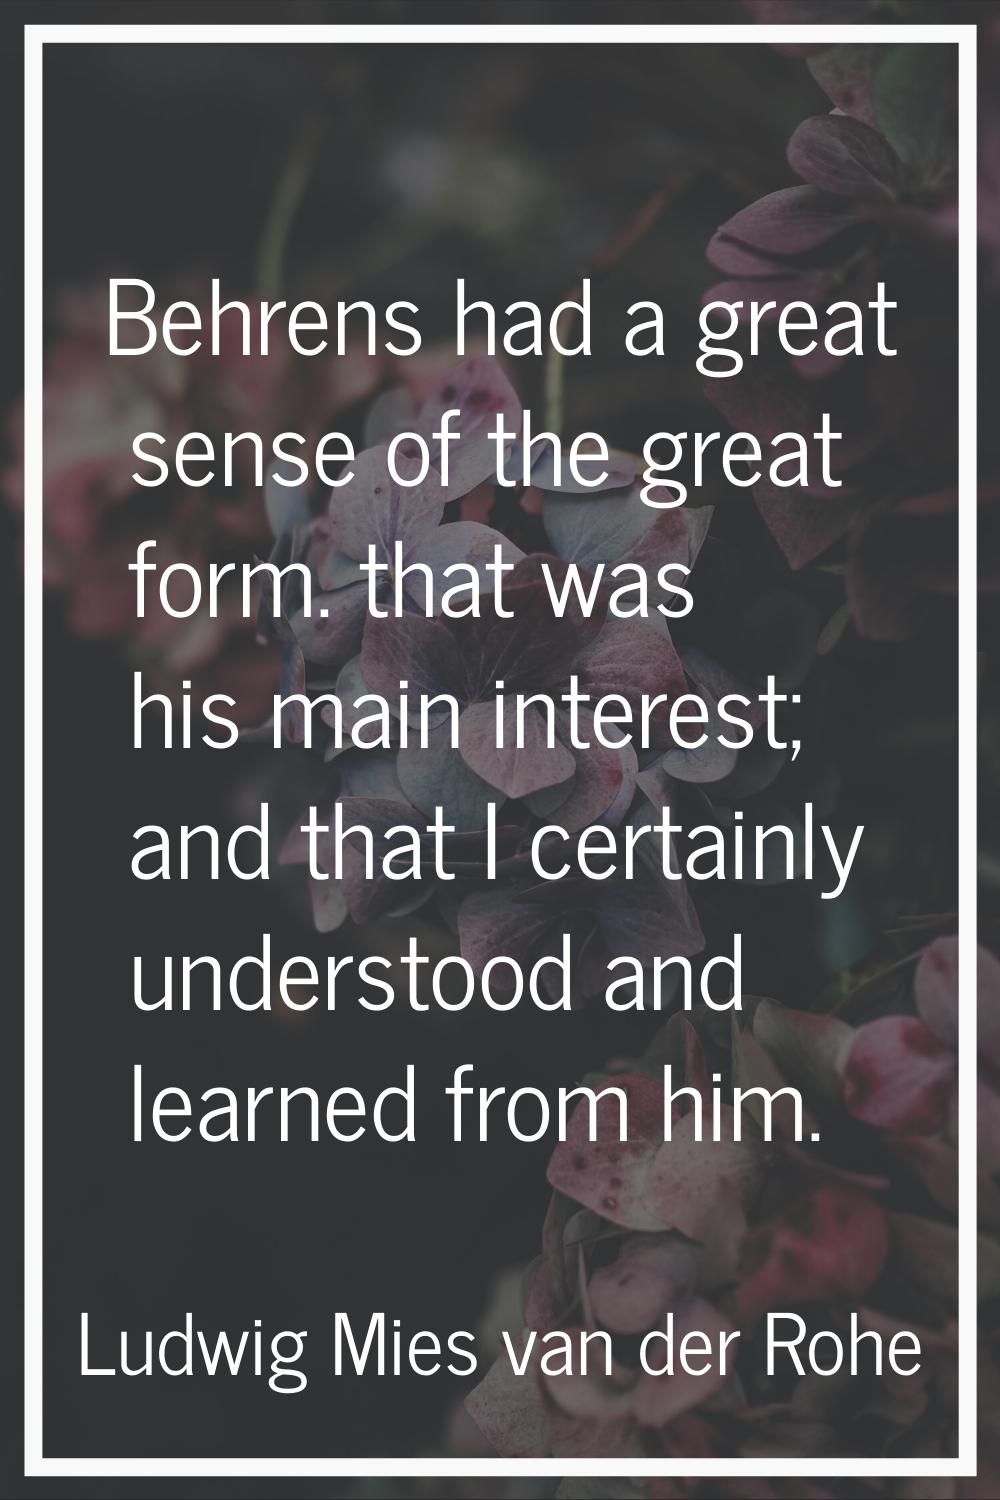 Behrens had a great sense of the great form. that was his main interest; and that I certainly under